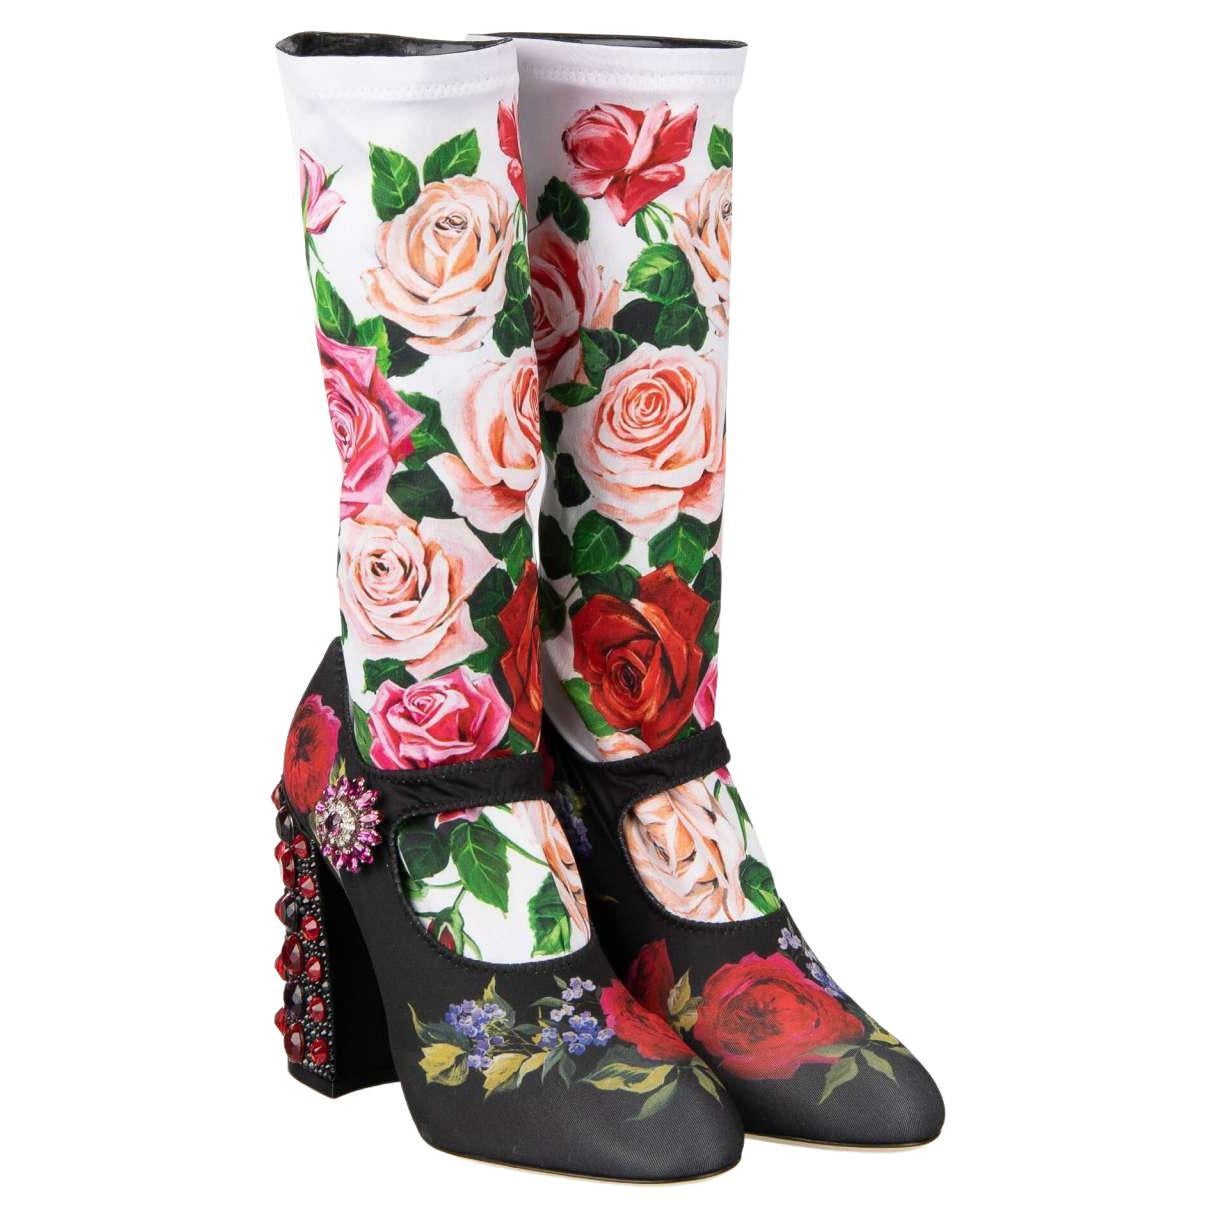 D&G Roses Printed Elastic Socks Pumps VALLY with Crystals Heel Black White 36 For Sale